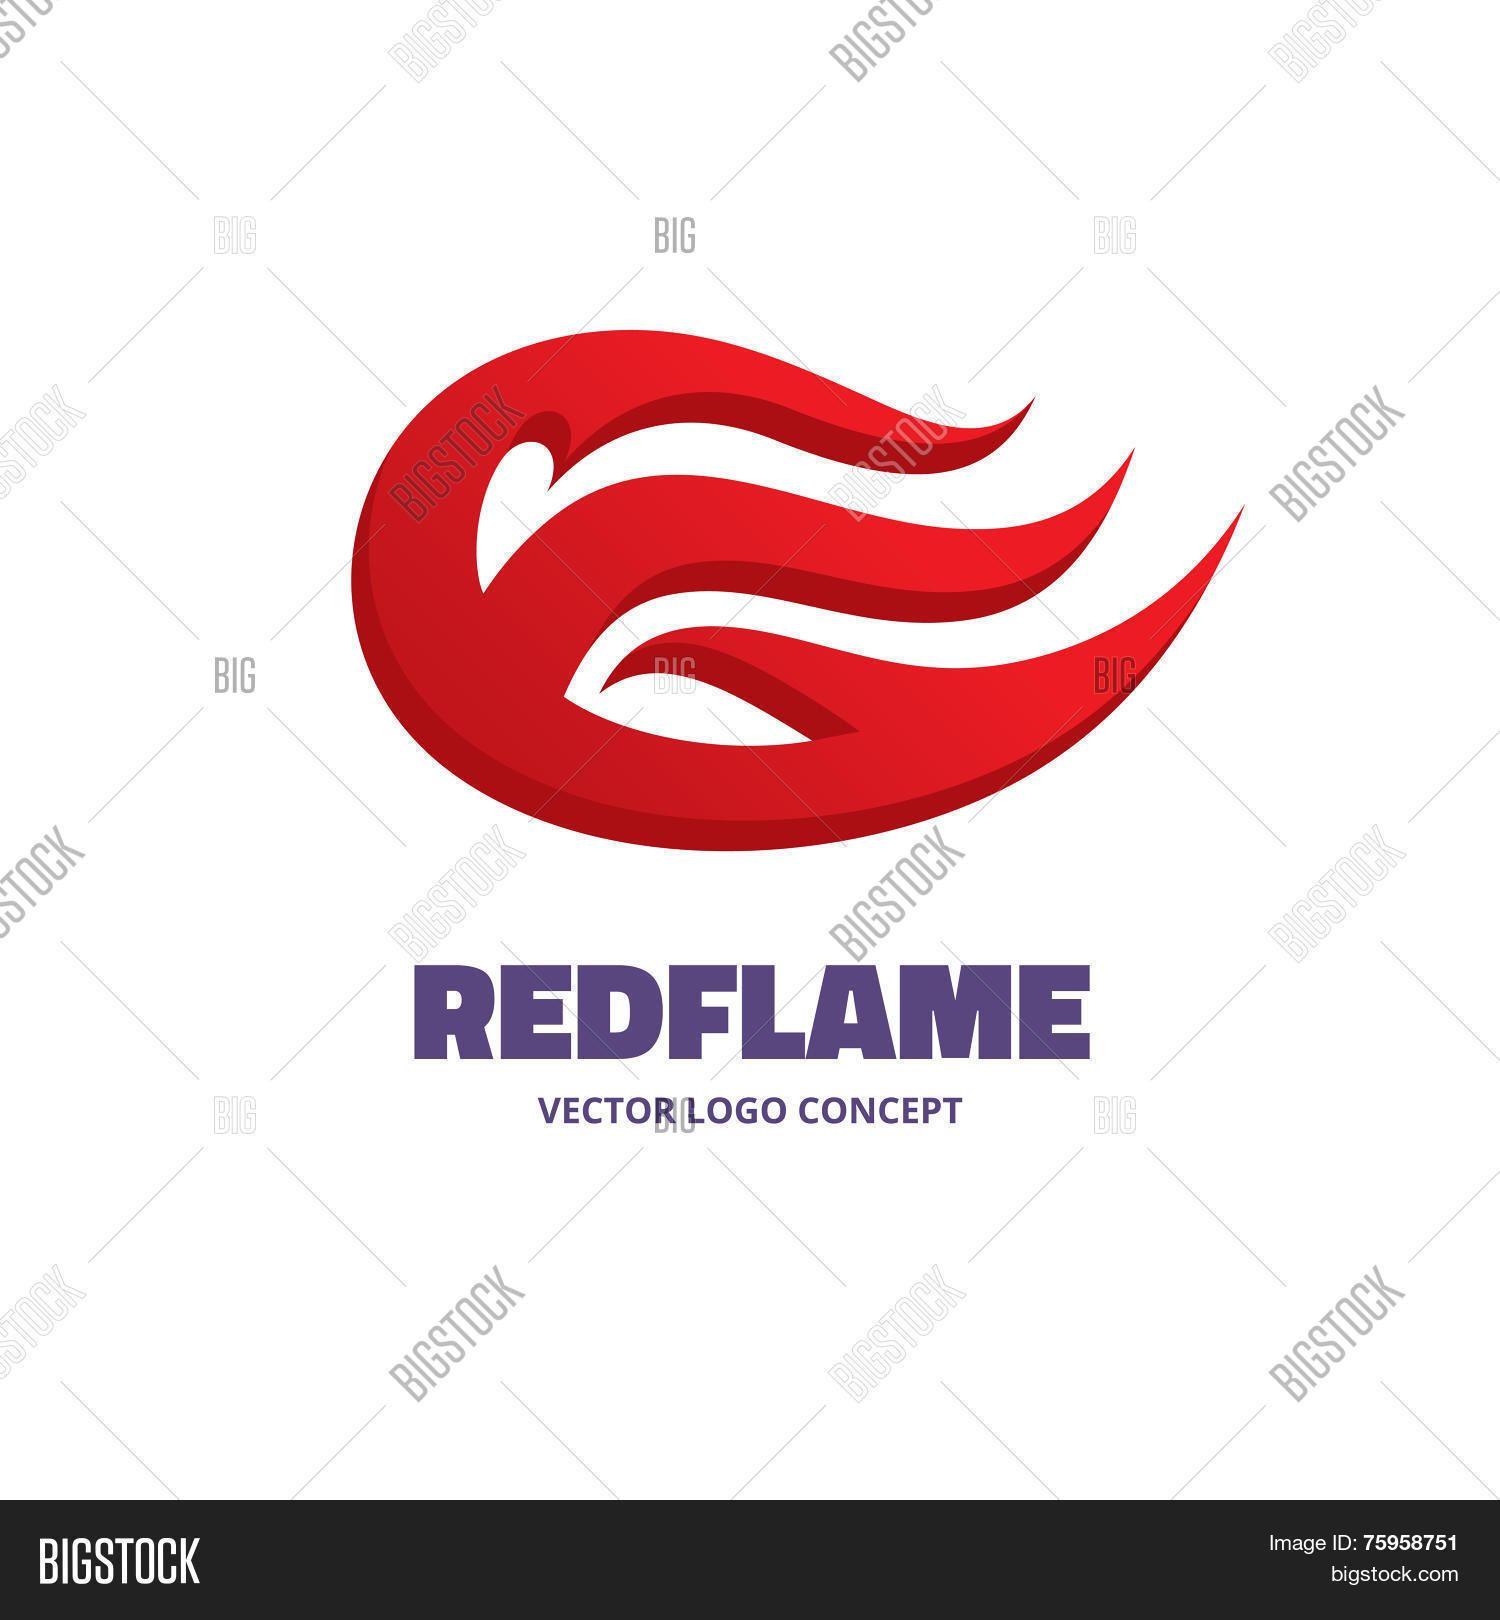 Black and Red Flame Logo - Free Red Flame Icon 158213. Download Red Flame Icon